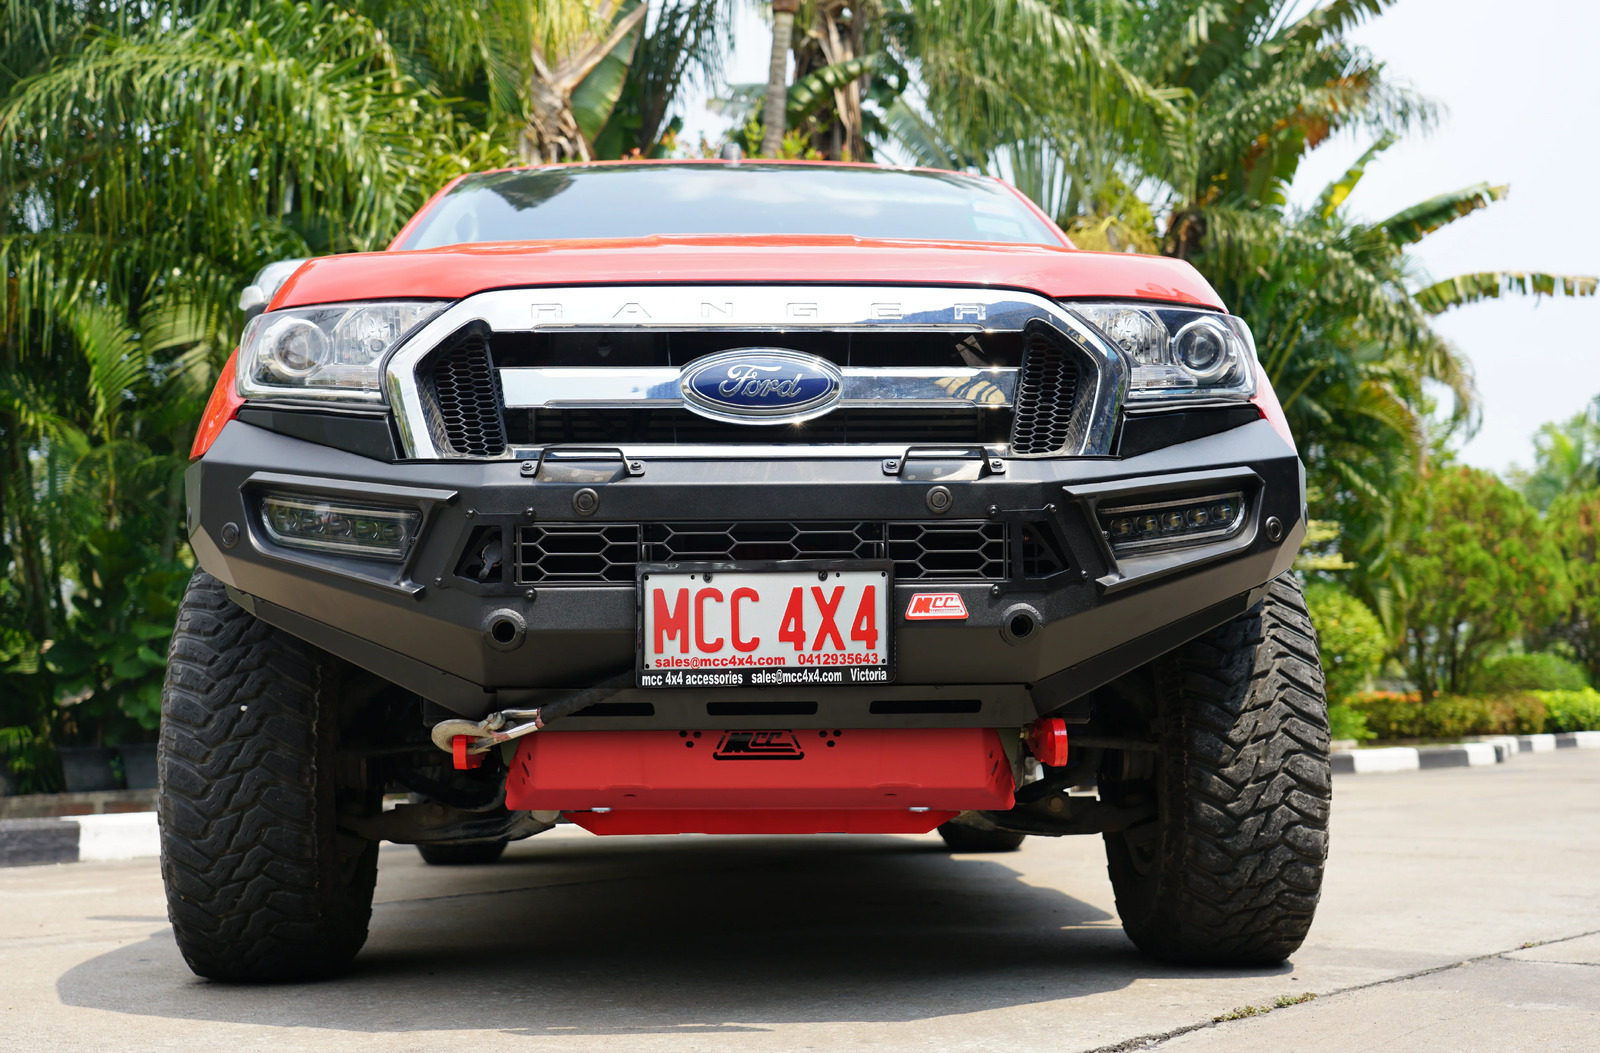 MCC 4X4 UNDERBODY BASH PLATE (3 PCE) TO SUIT FORD RANGER (2011-2021) & MAZDA BT-50 (2011-2020)